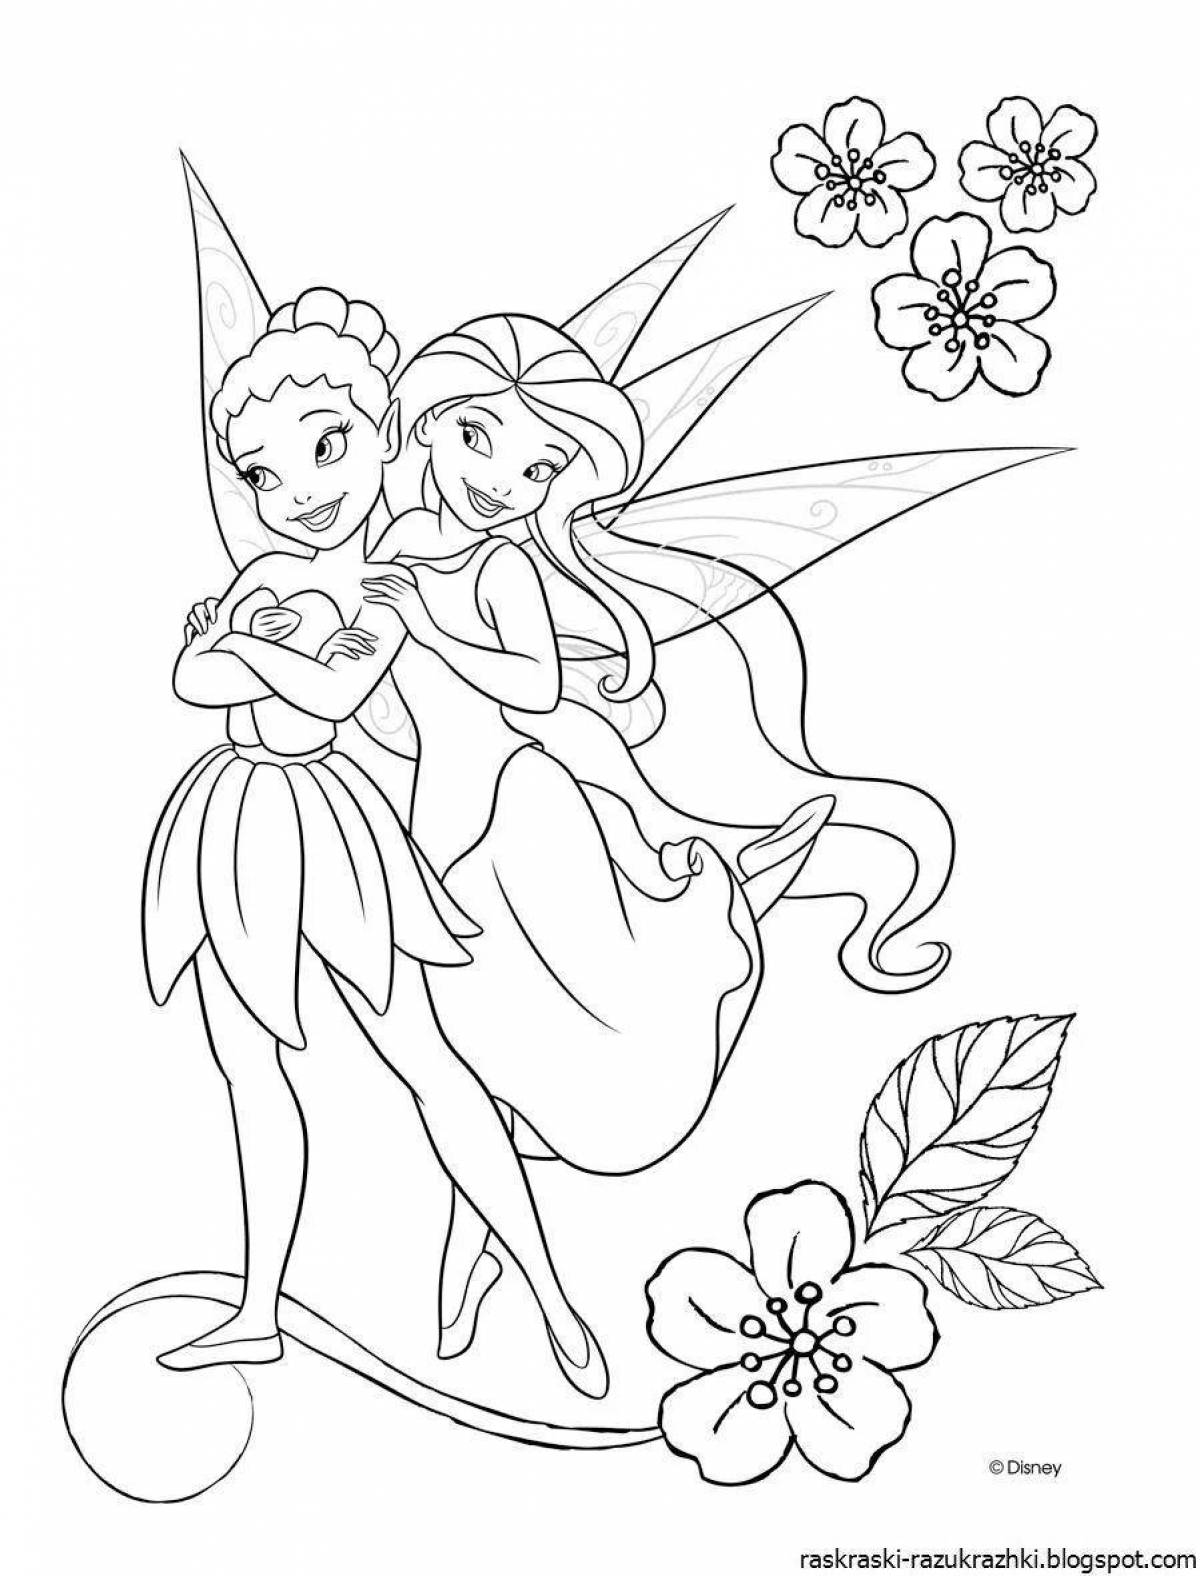 Glowing fairy coloring pages for kids 5-6 years old